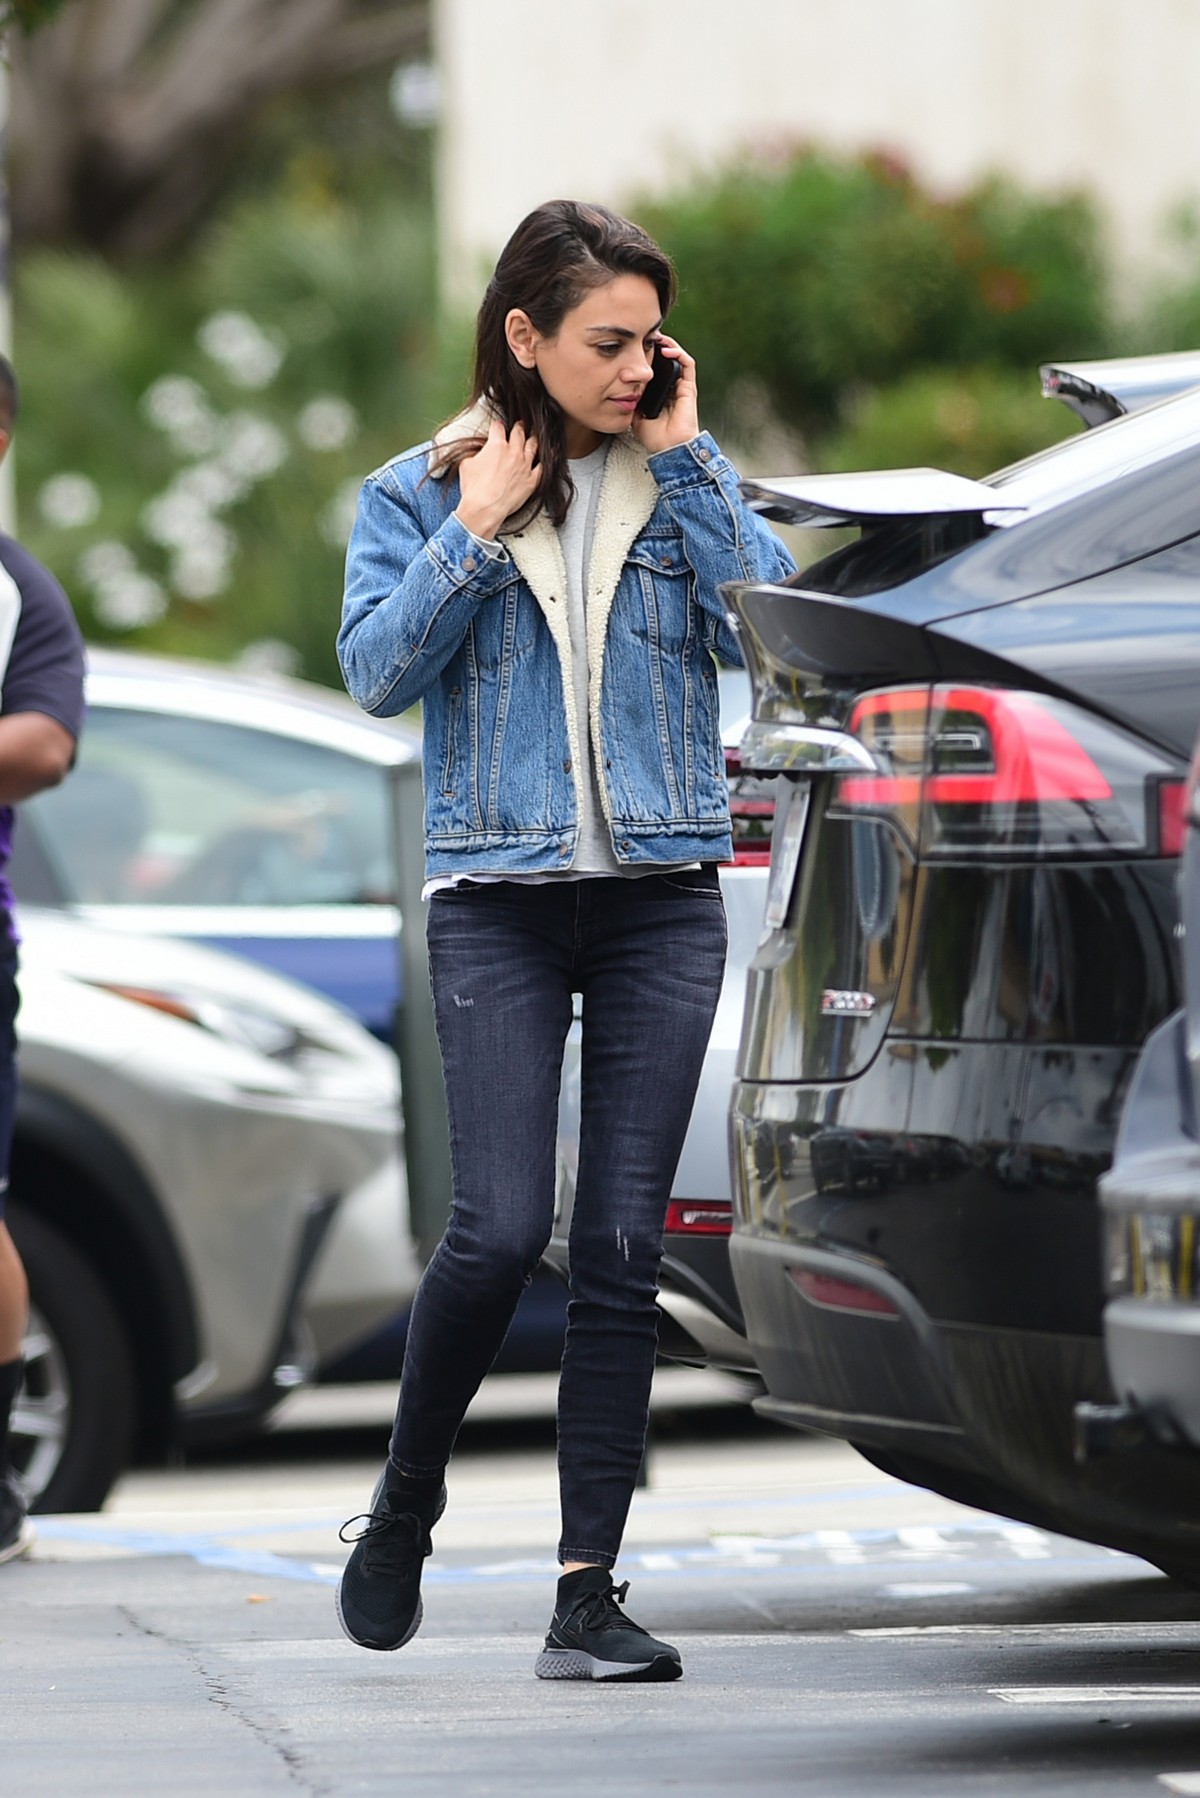 Mila Kunis reaches a Salon for a Pampering Session in Los Angeles 2019/05/10